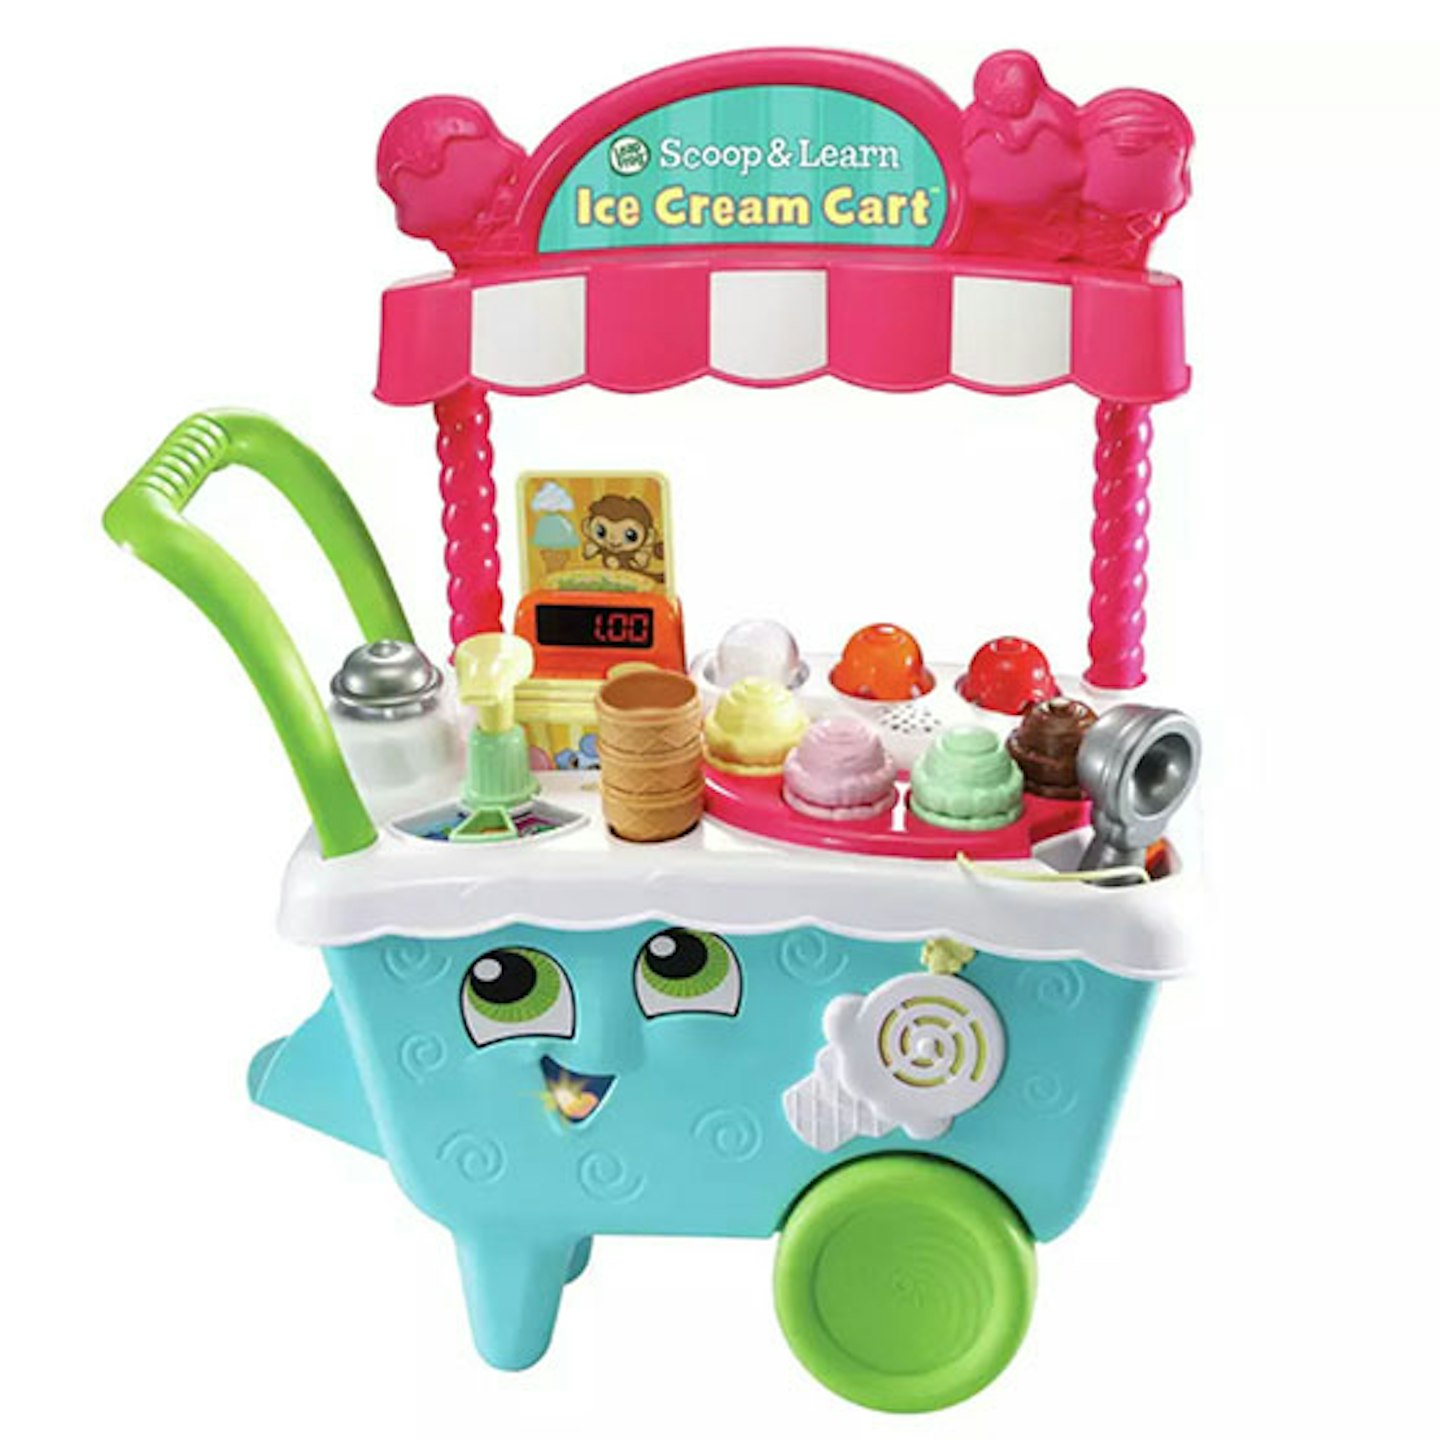 Best for role play: LeapFrog Scoop and Learn Ice Cream Cart